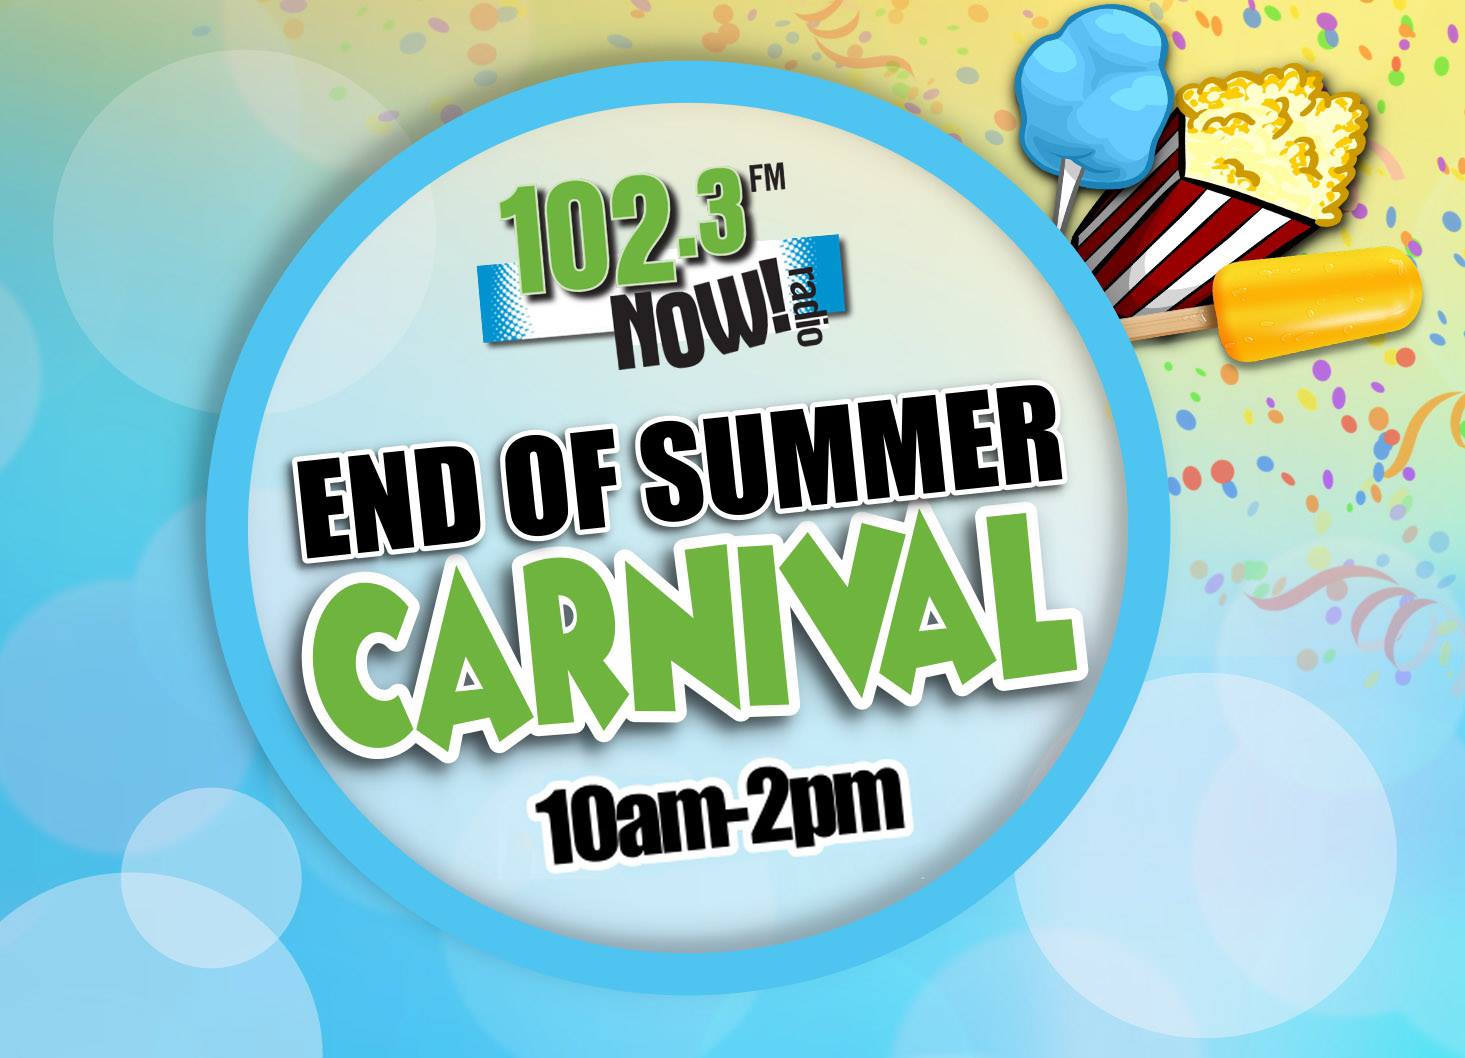 Now! End of Summer Carnival